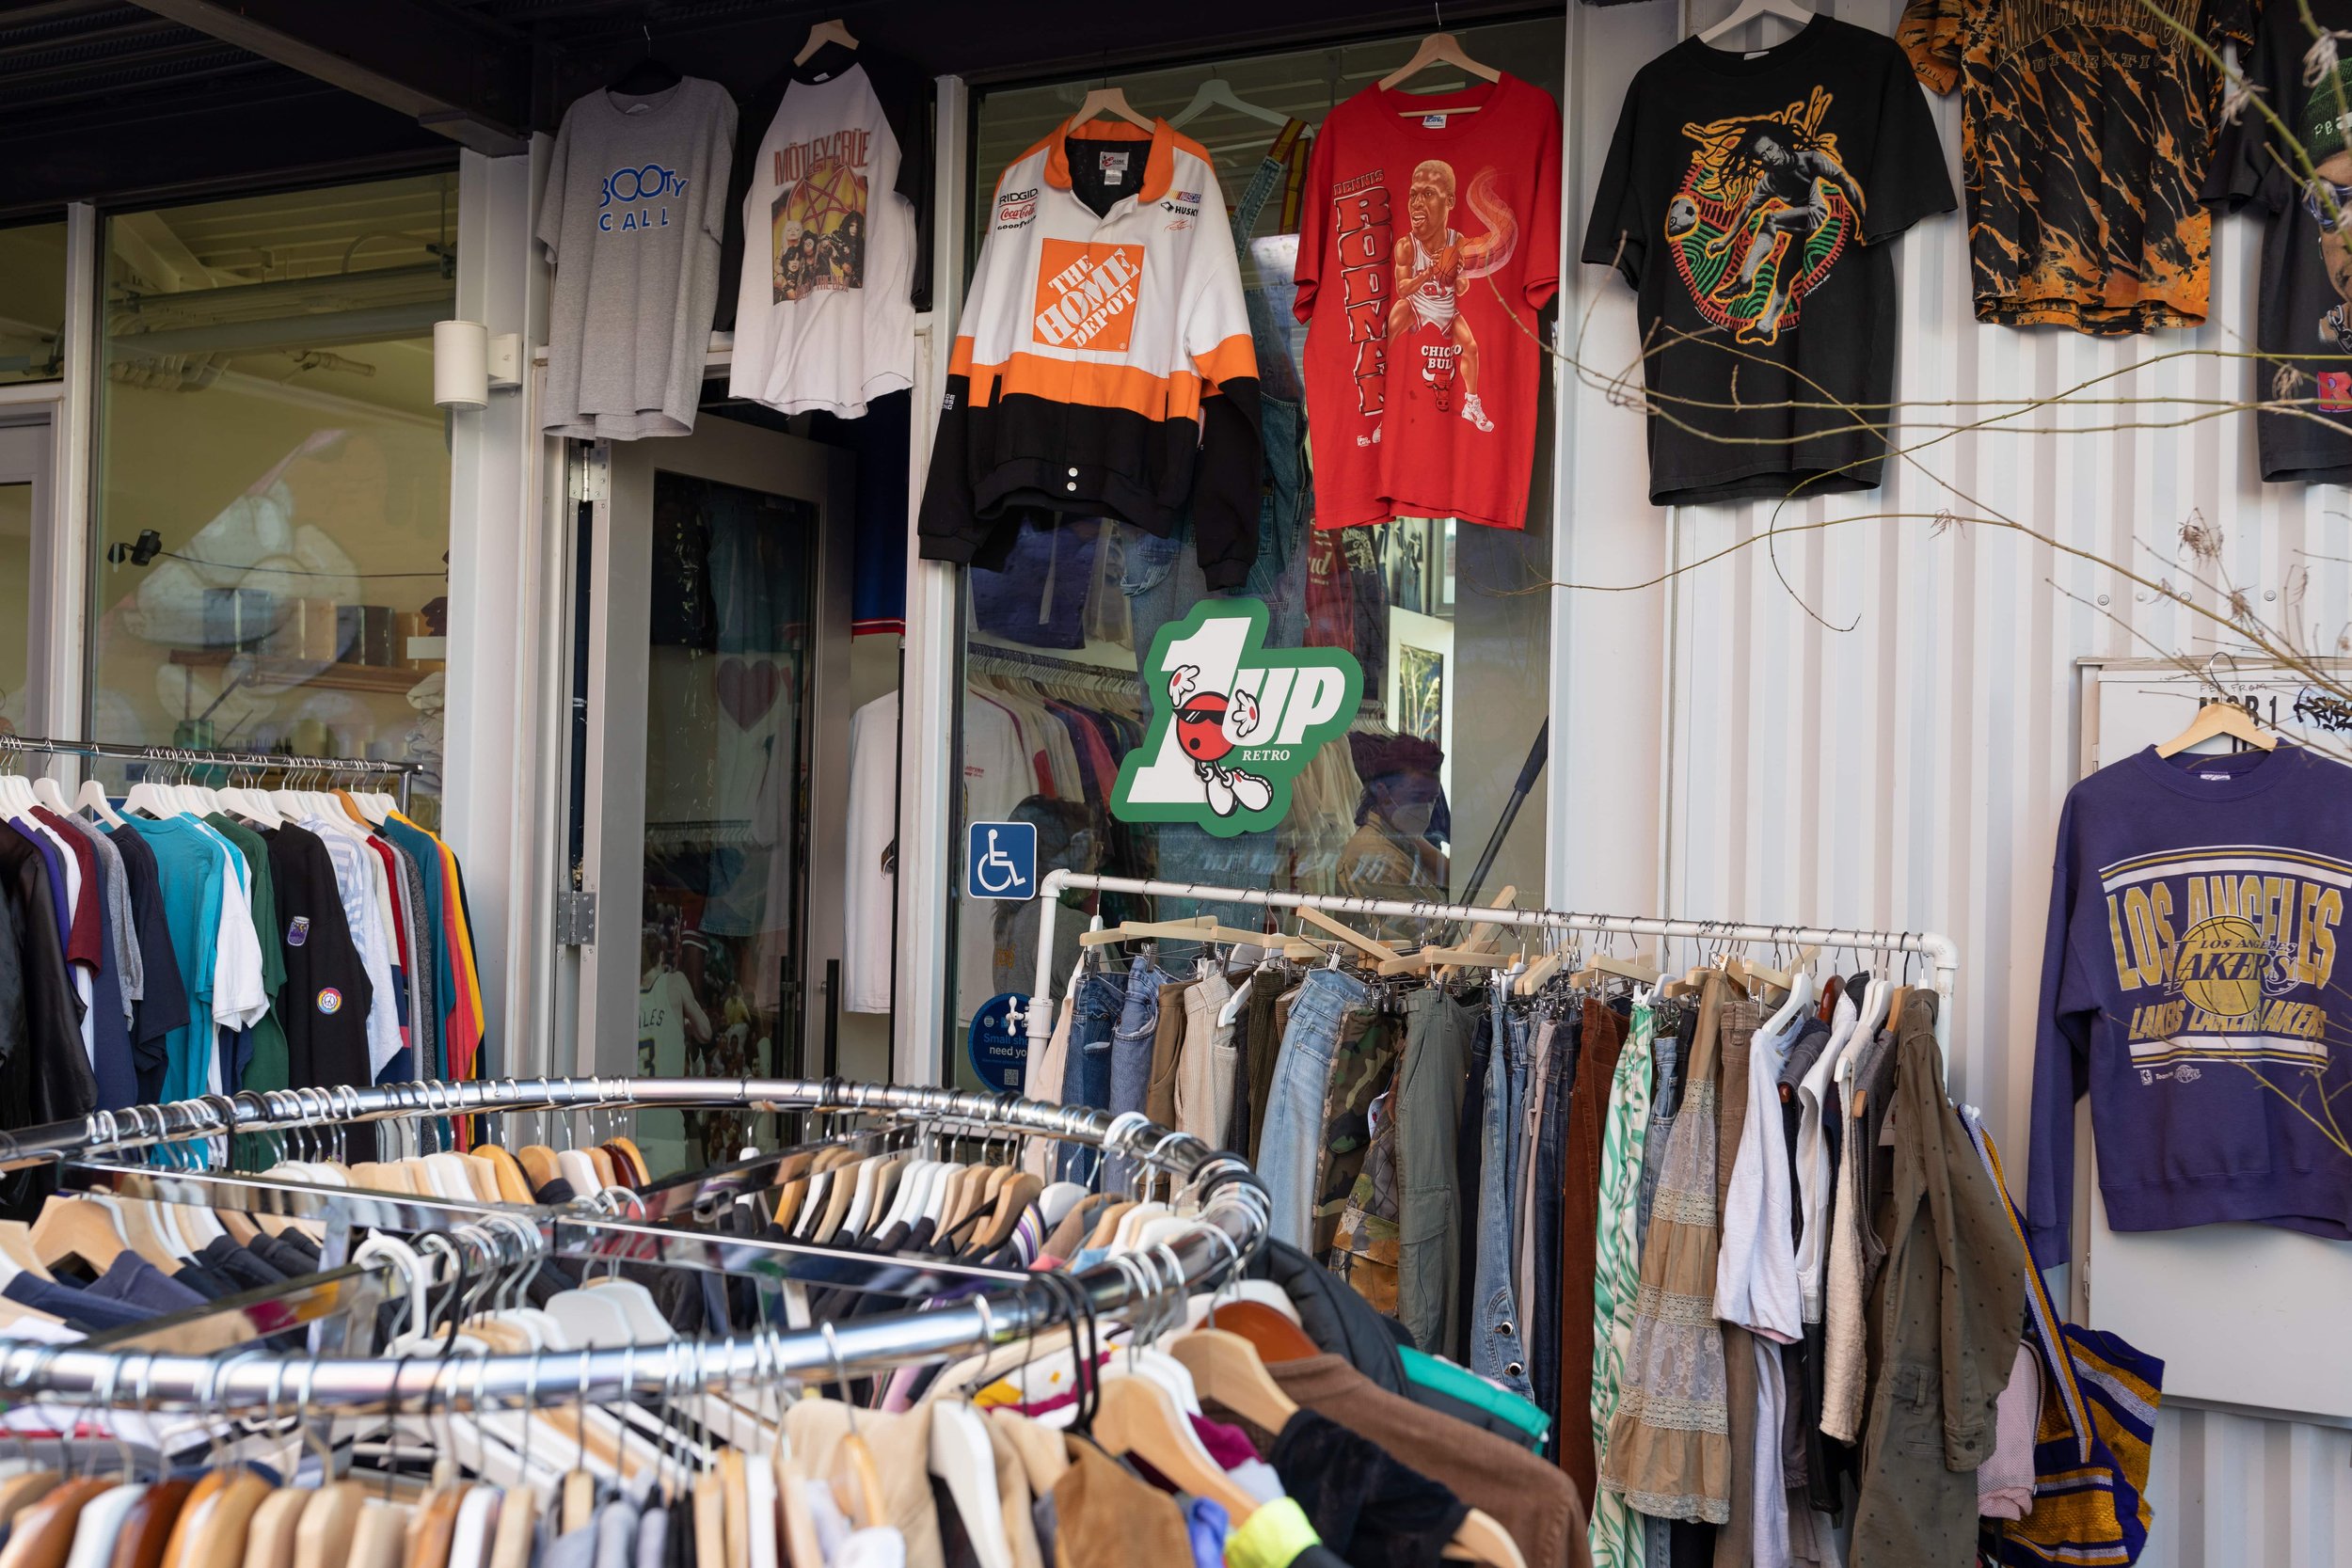 1 Up Retro Clothing Store - A Vintage Clothing Shop